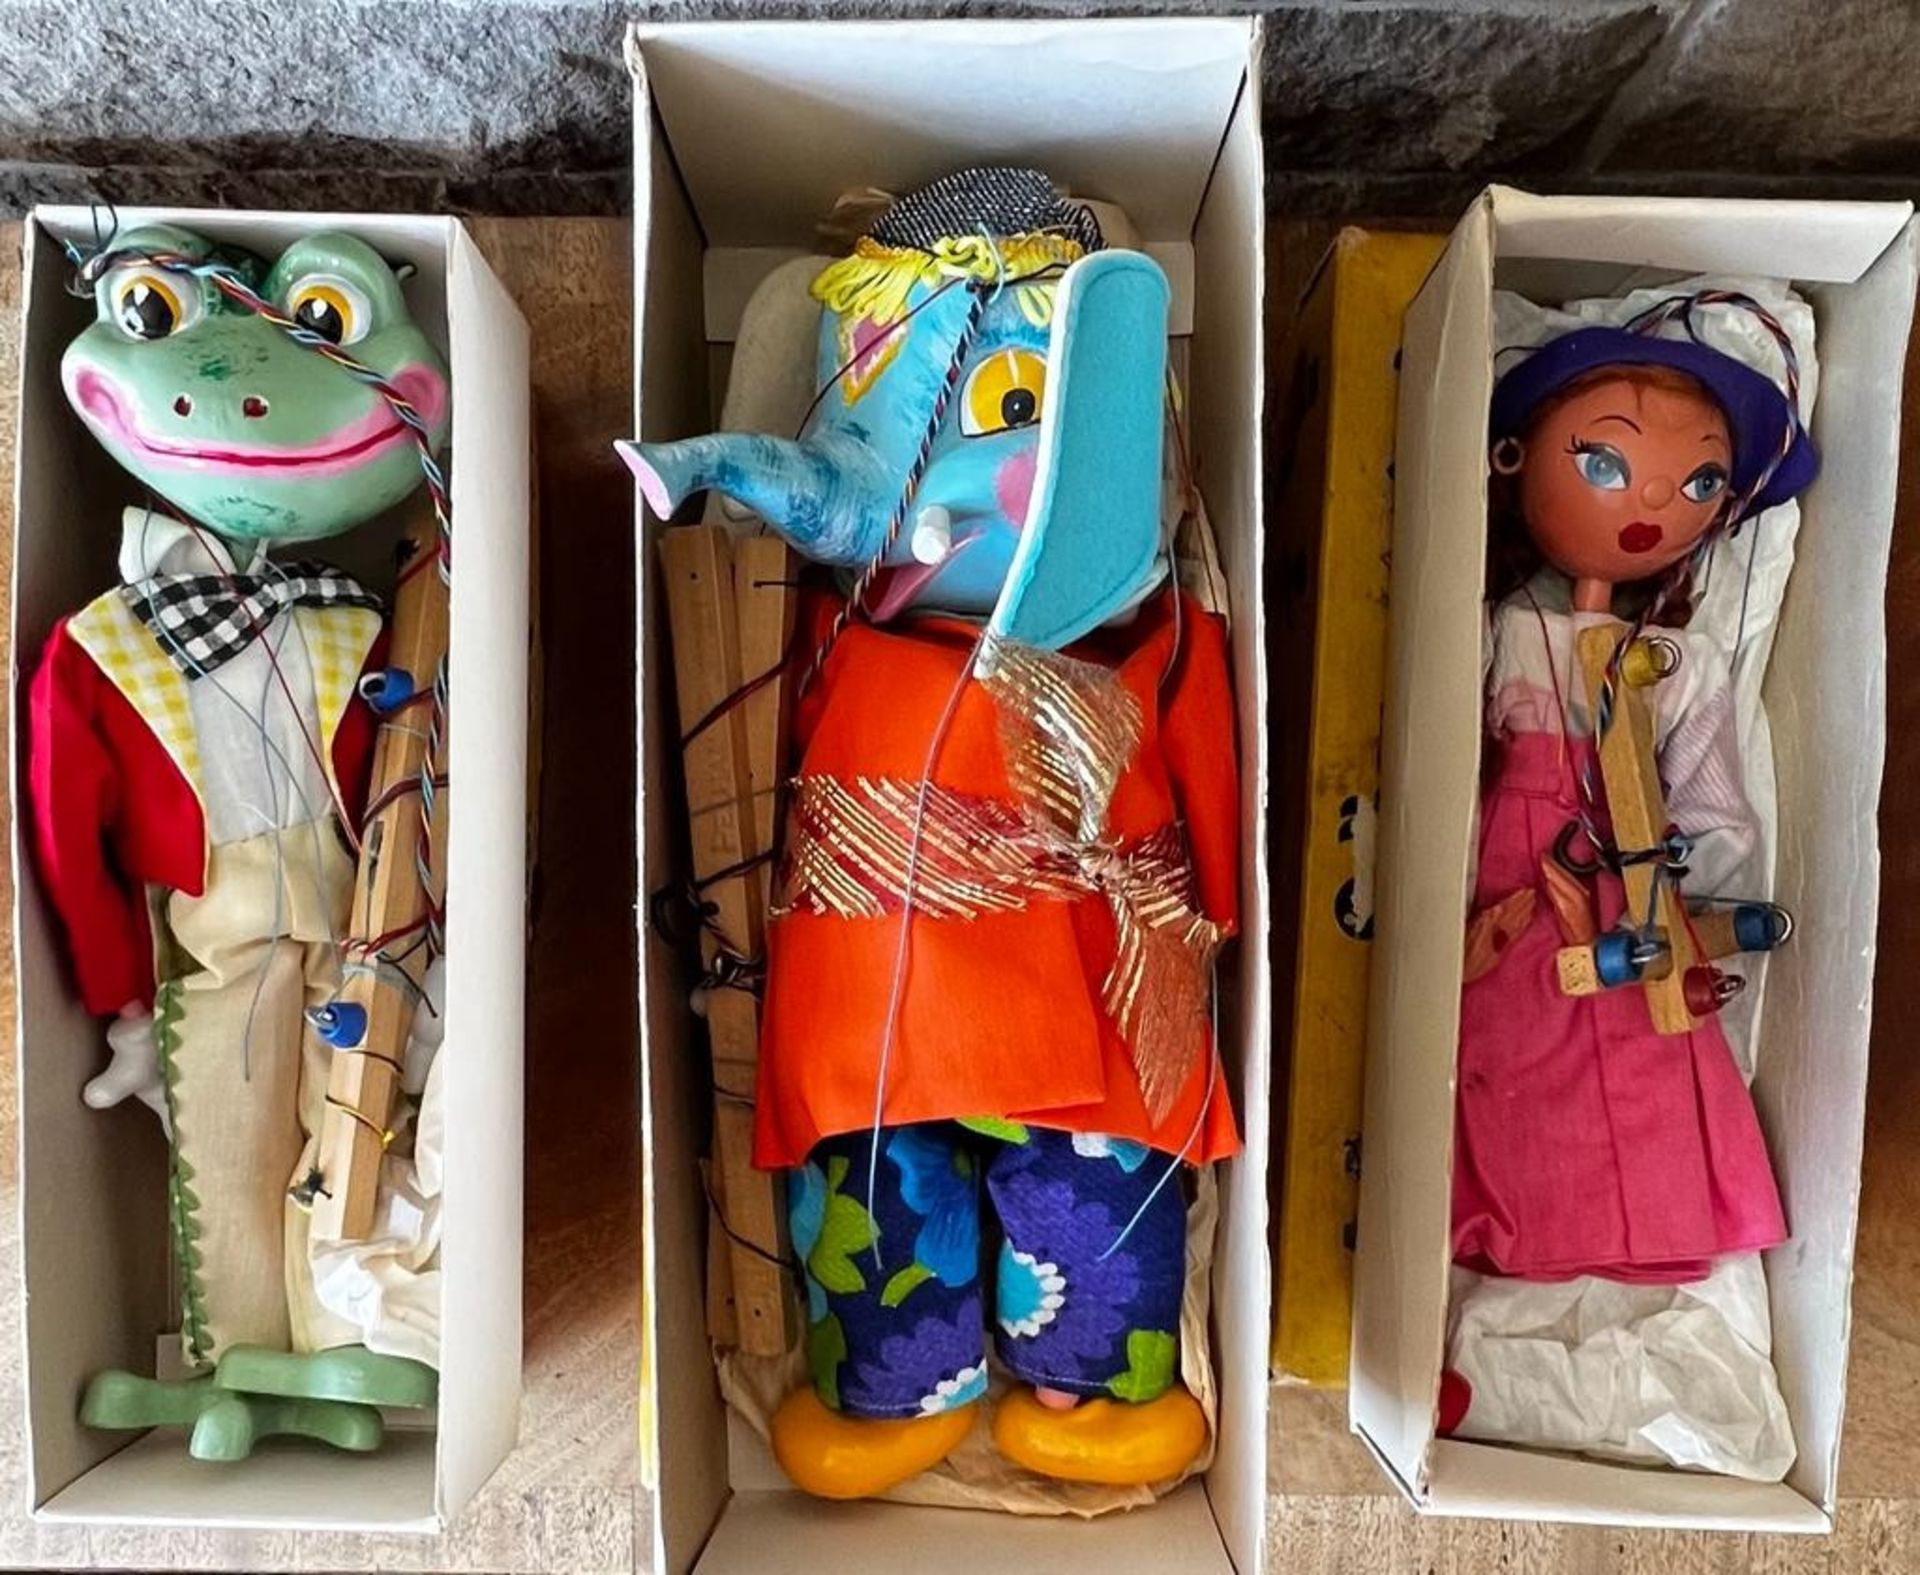 THREE LARGE PELHAM PUPPETS WITH ORIGINAL BOXES